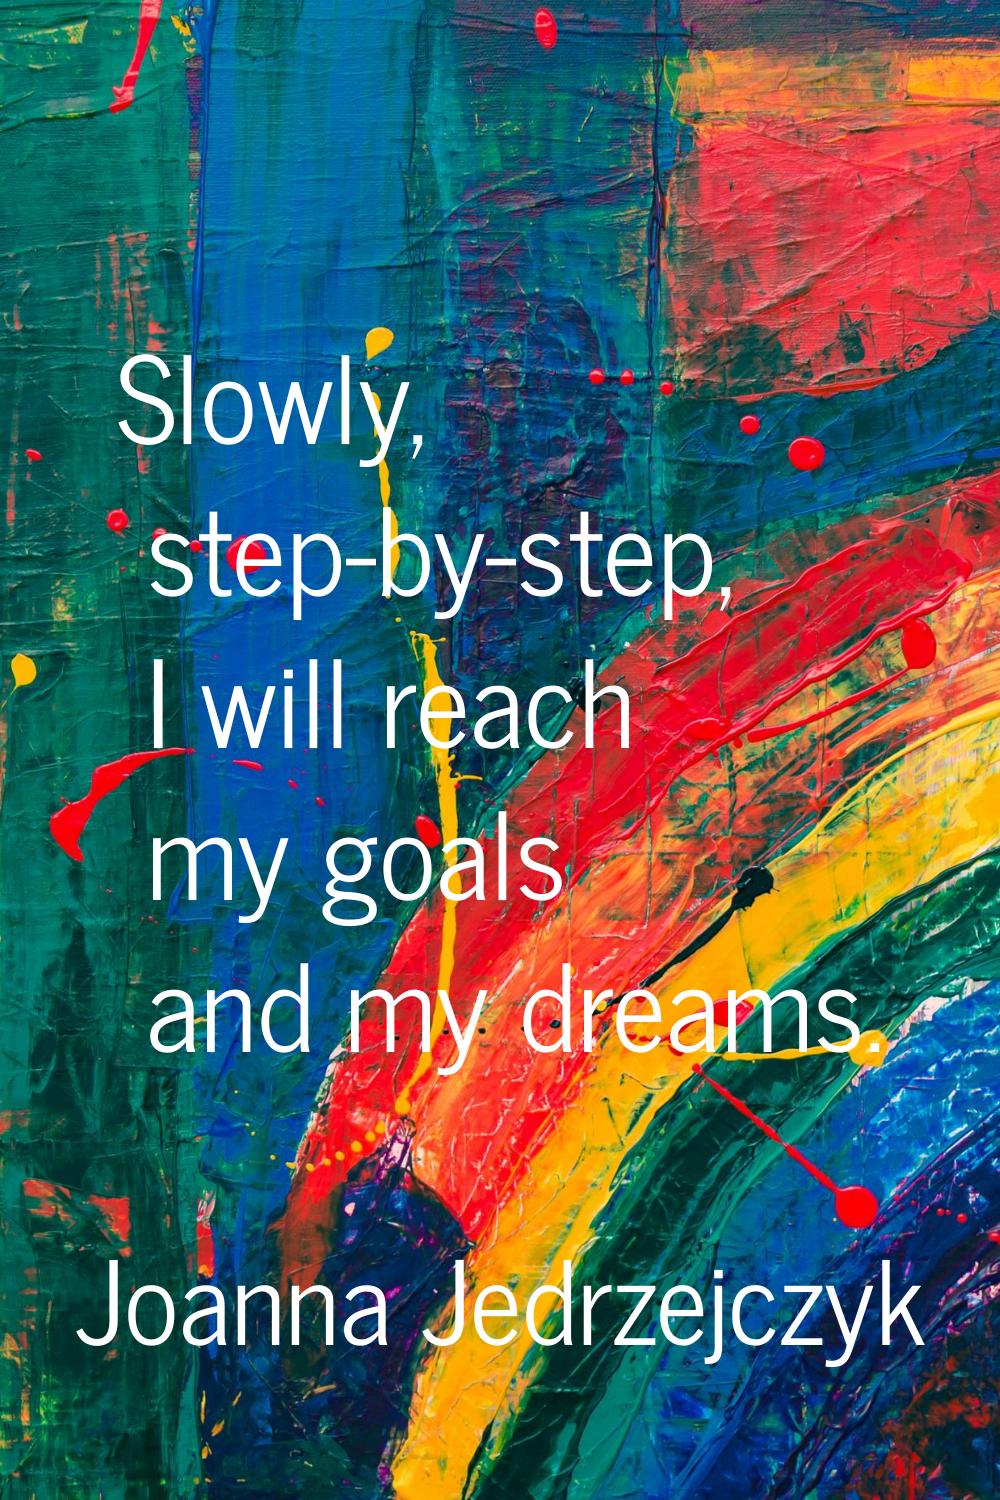 Slowly, step-by-step, I will reach my goals and my dreams.